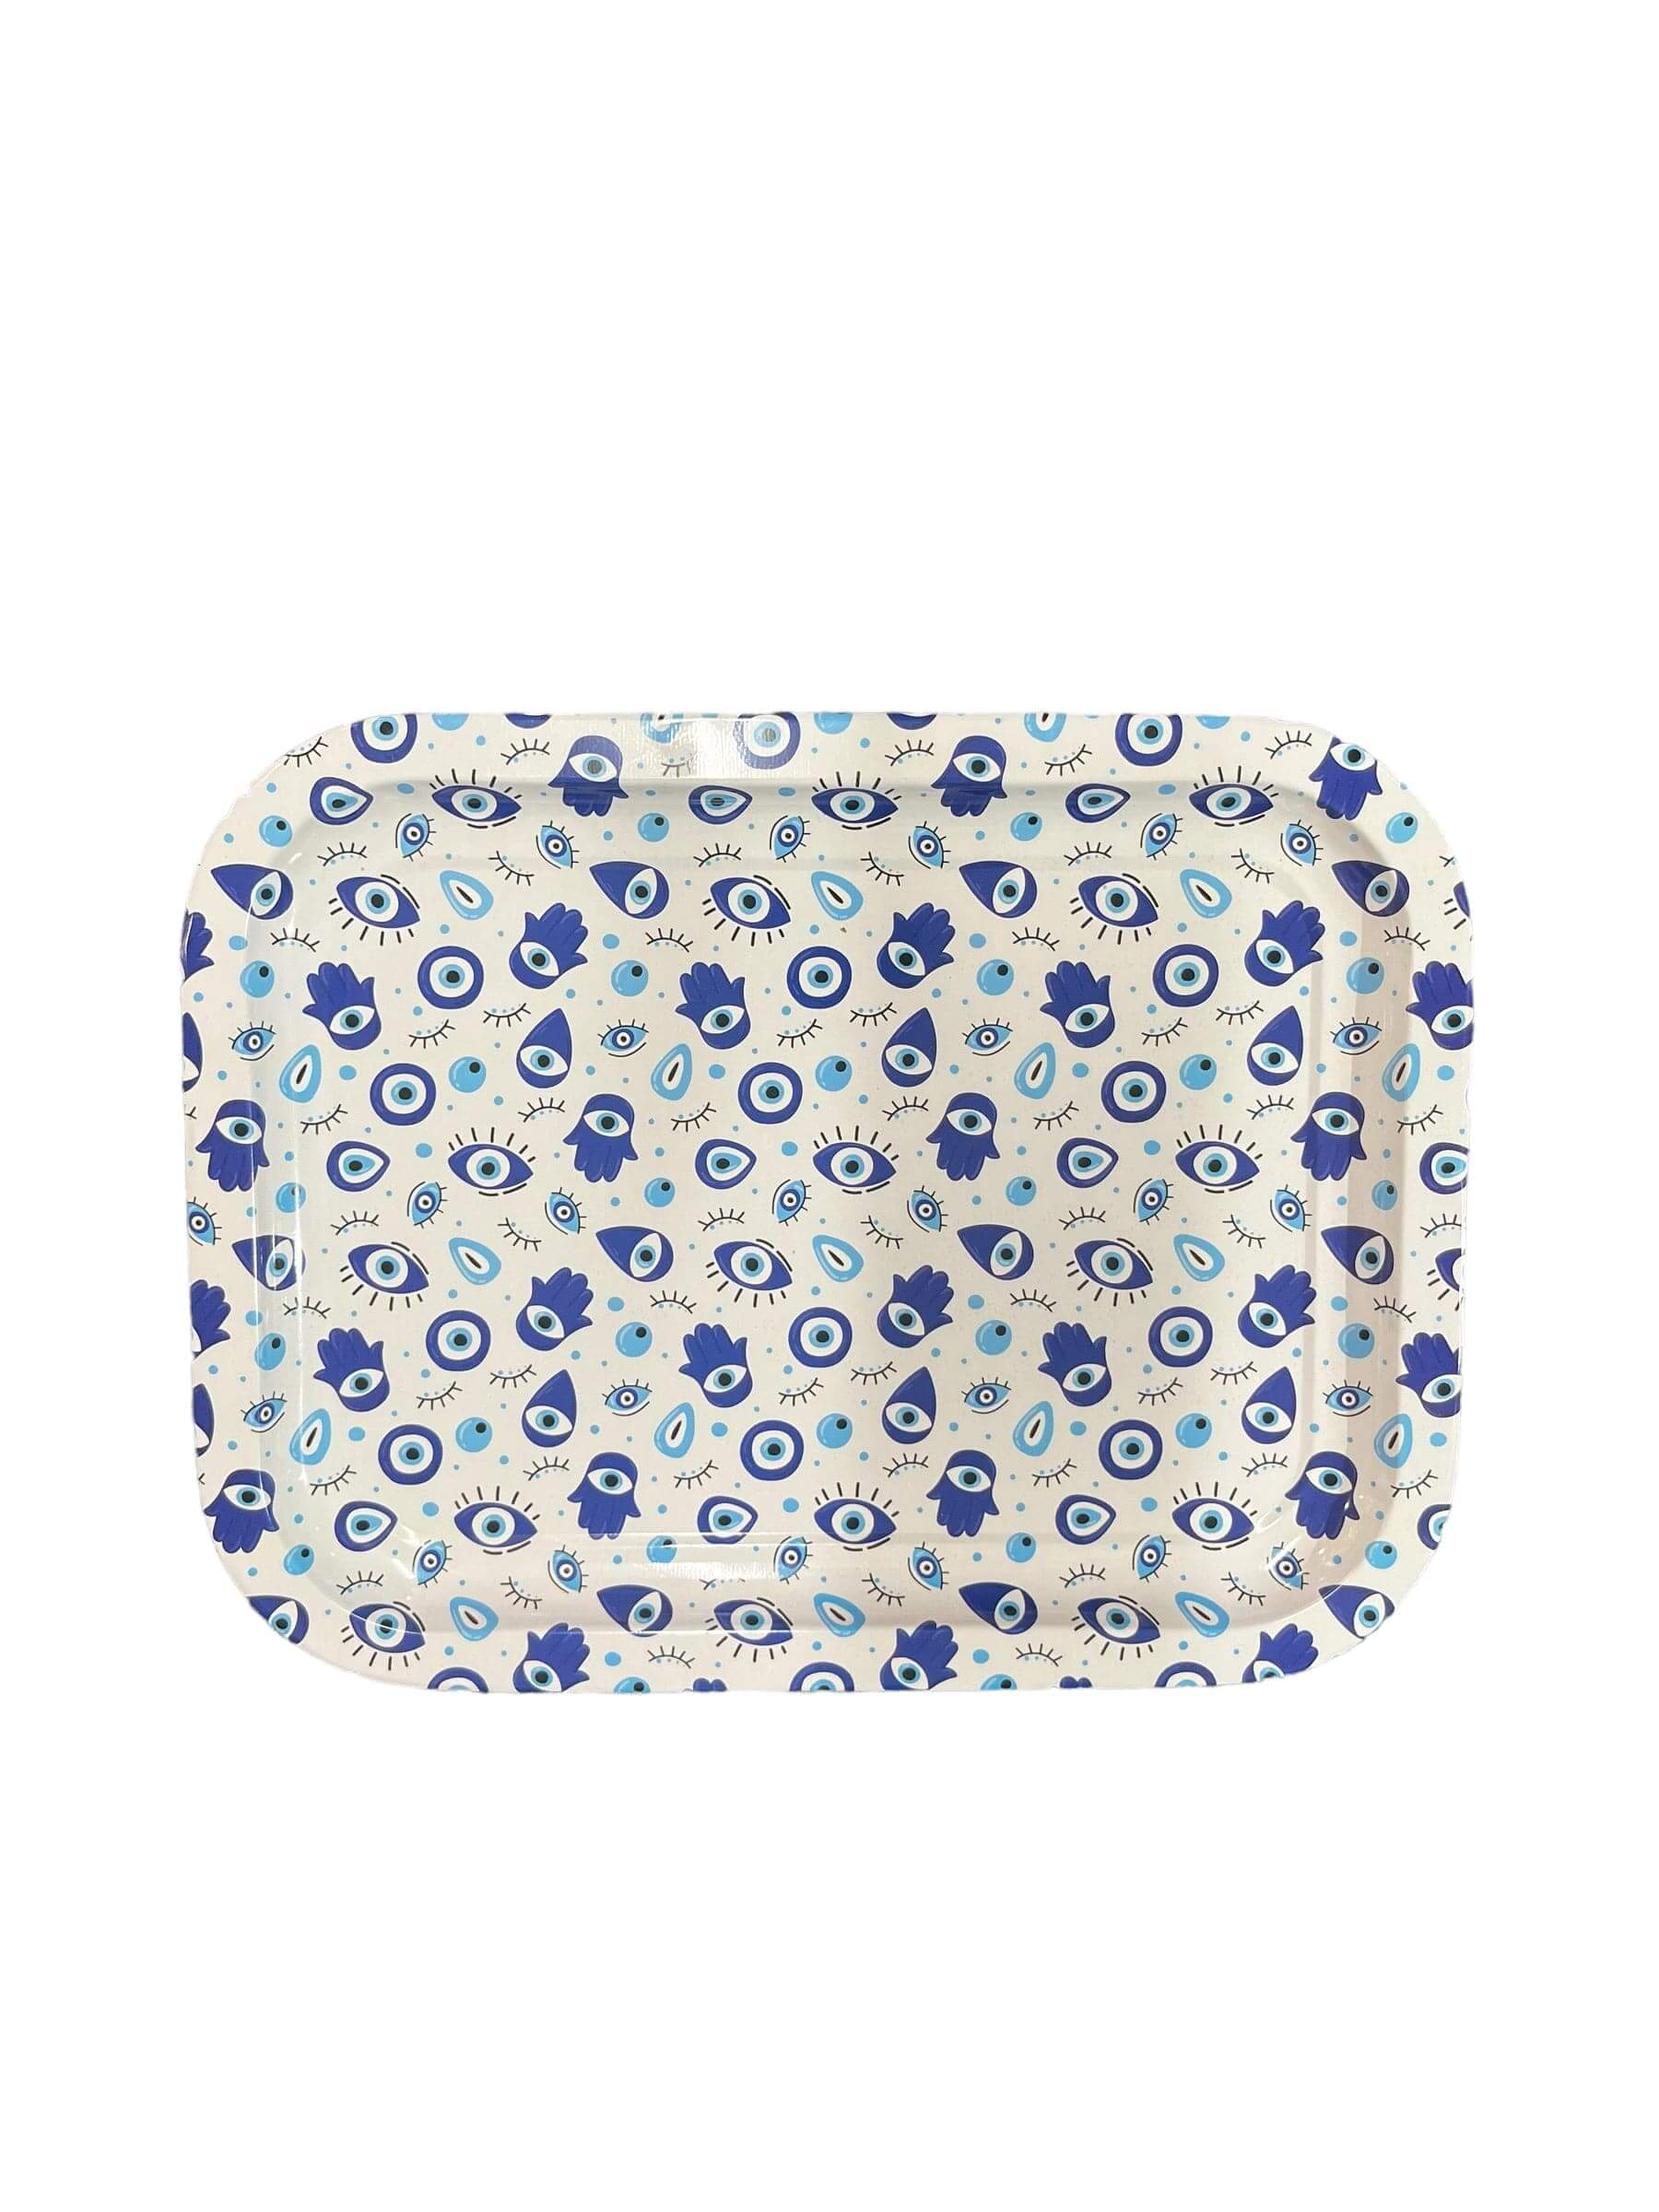 This Metal Tray Evil Eye is perfect for adding a touch of boho-chic style to your home decor. Crafted from metal, it features a distinctive evil eye motif to protect you from bad luck and health concerns. Its stylish design complements any decor, making i